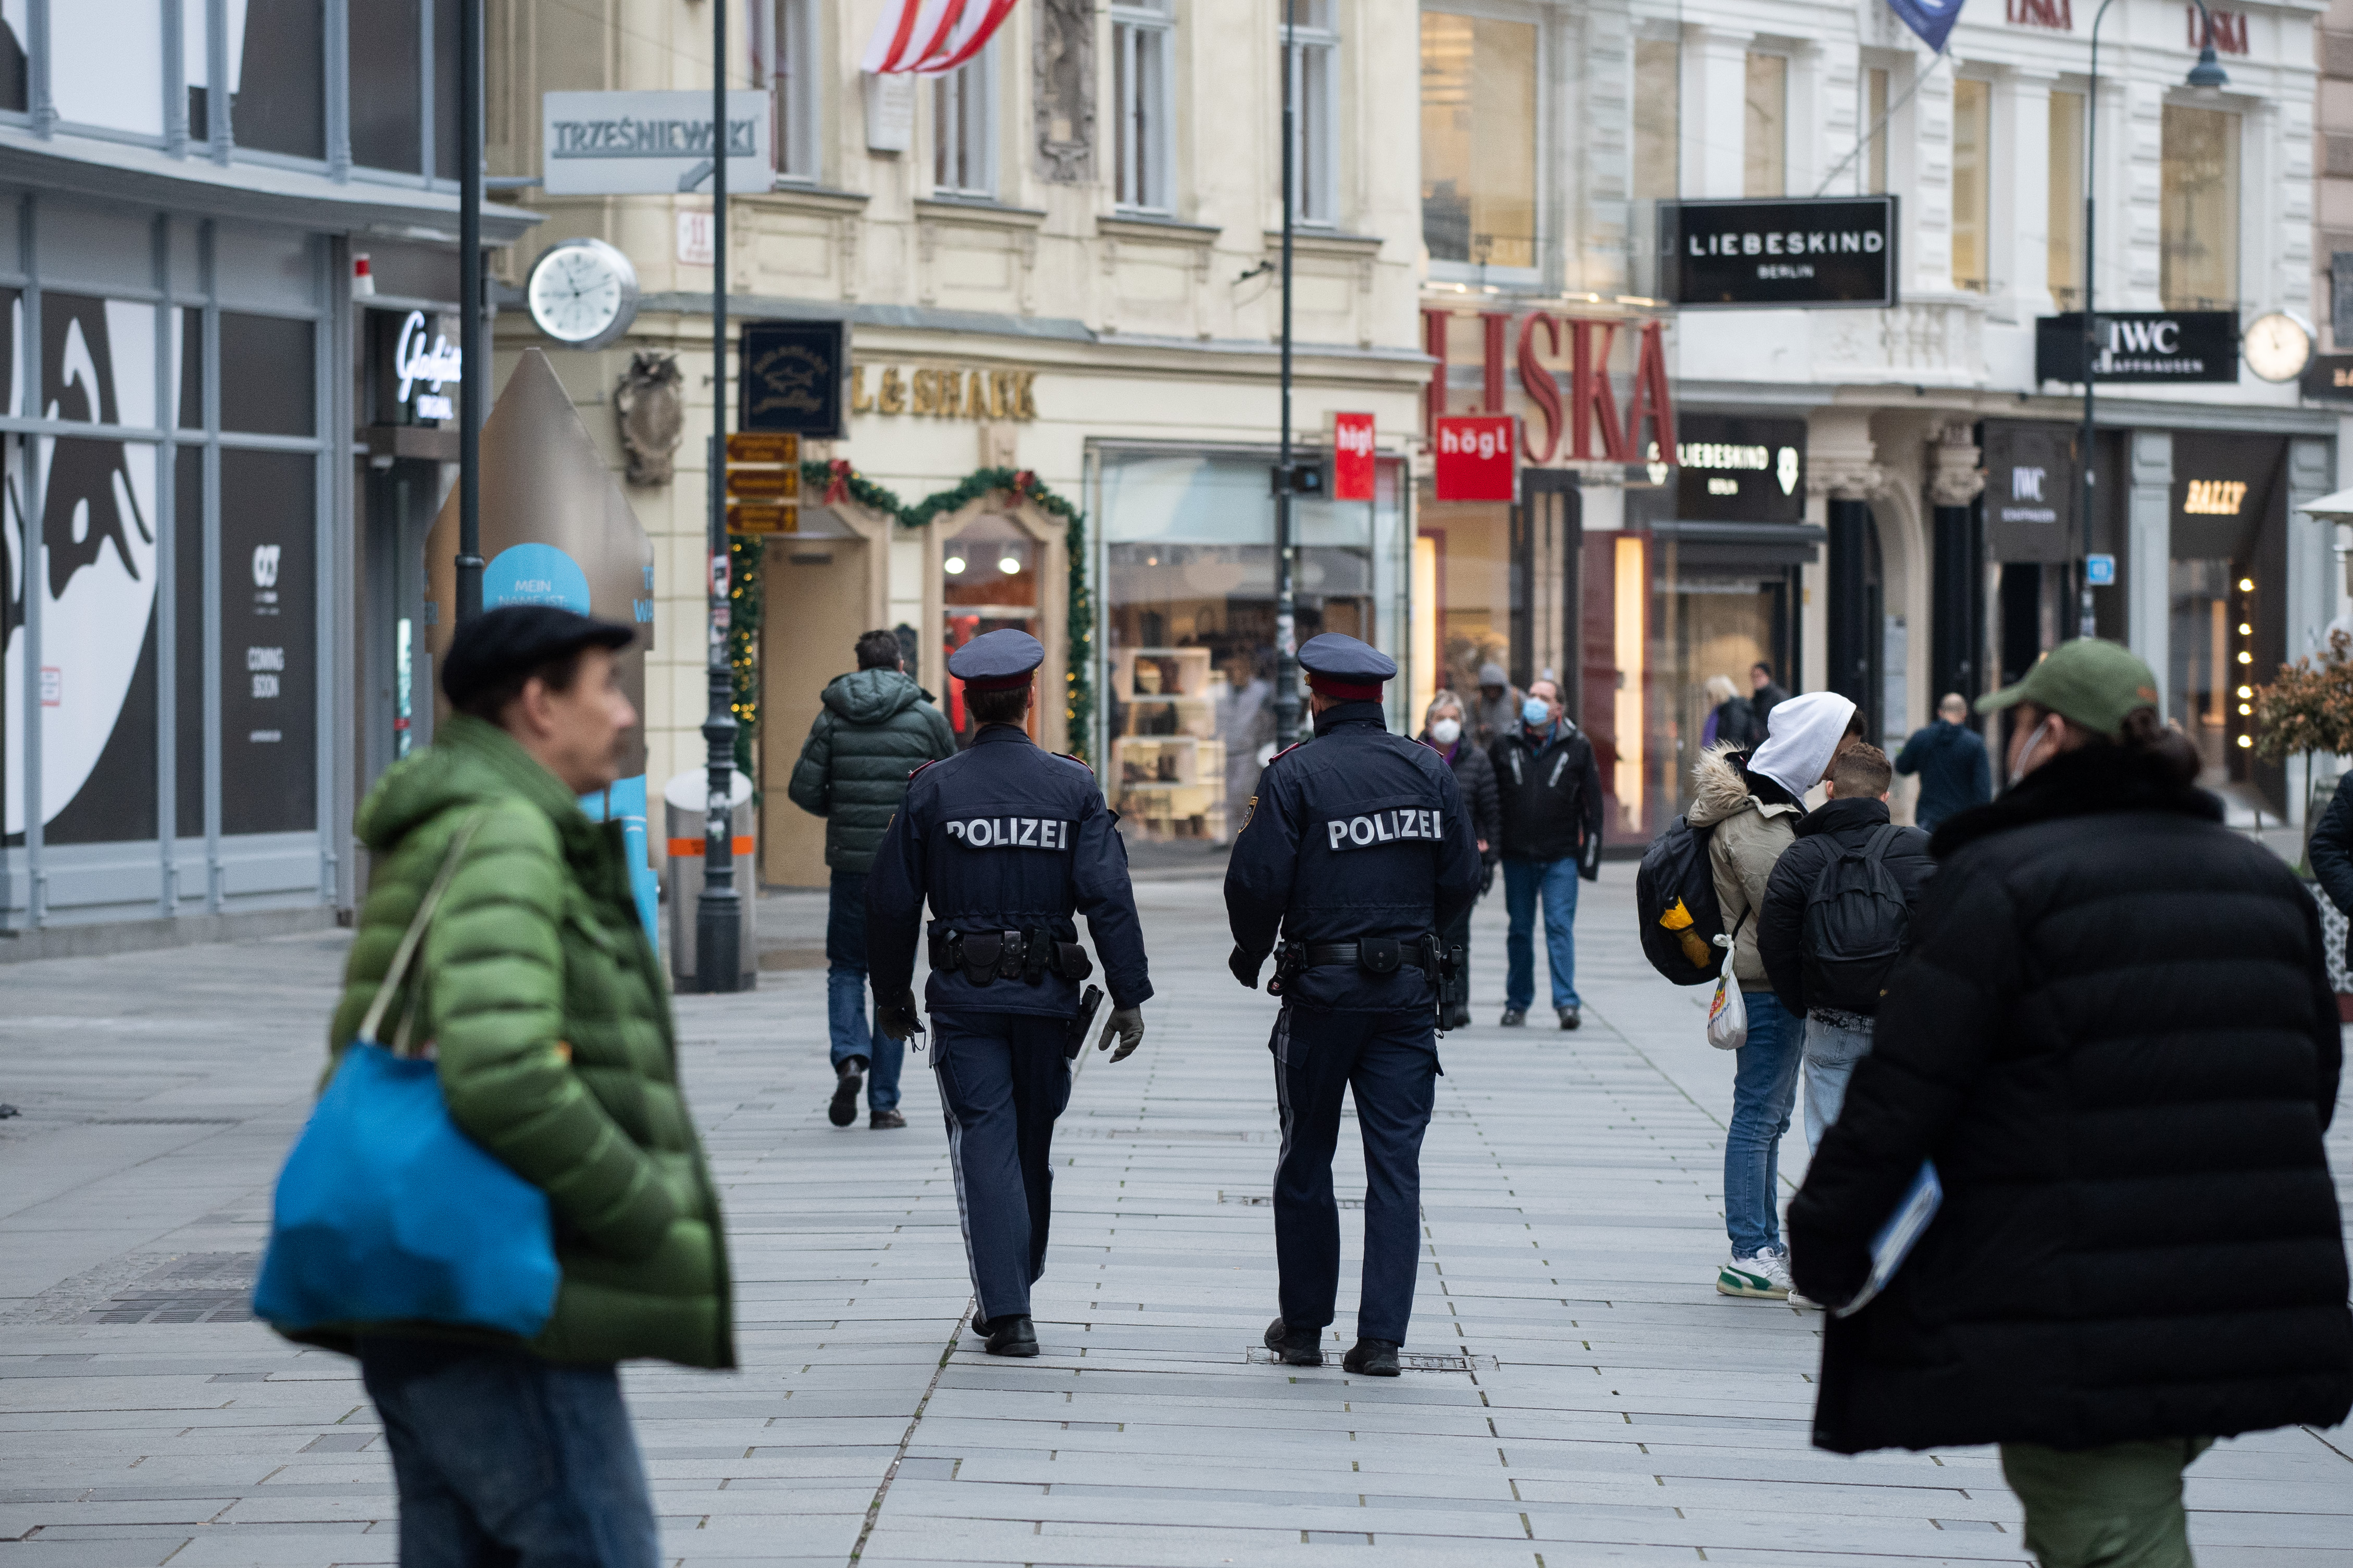 Police patrols 'Am Graben' shopping street on the first day of a nationwide, temporary lockdown during the fourth wave of the novel coronavirus pandemic on November 22nd, 2021 in Vienna, Austria.